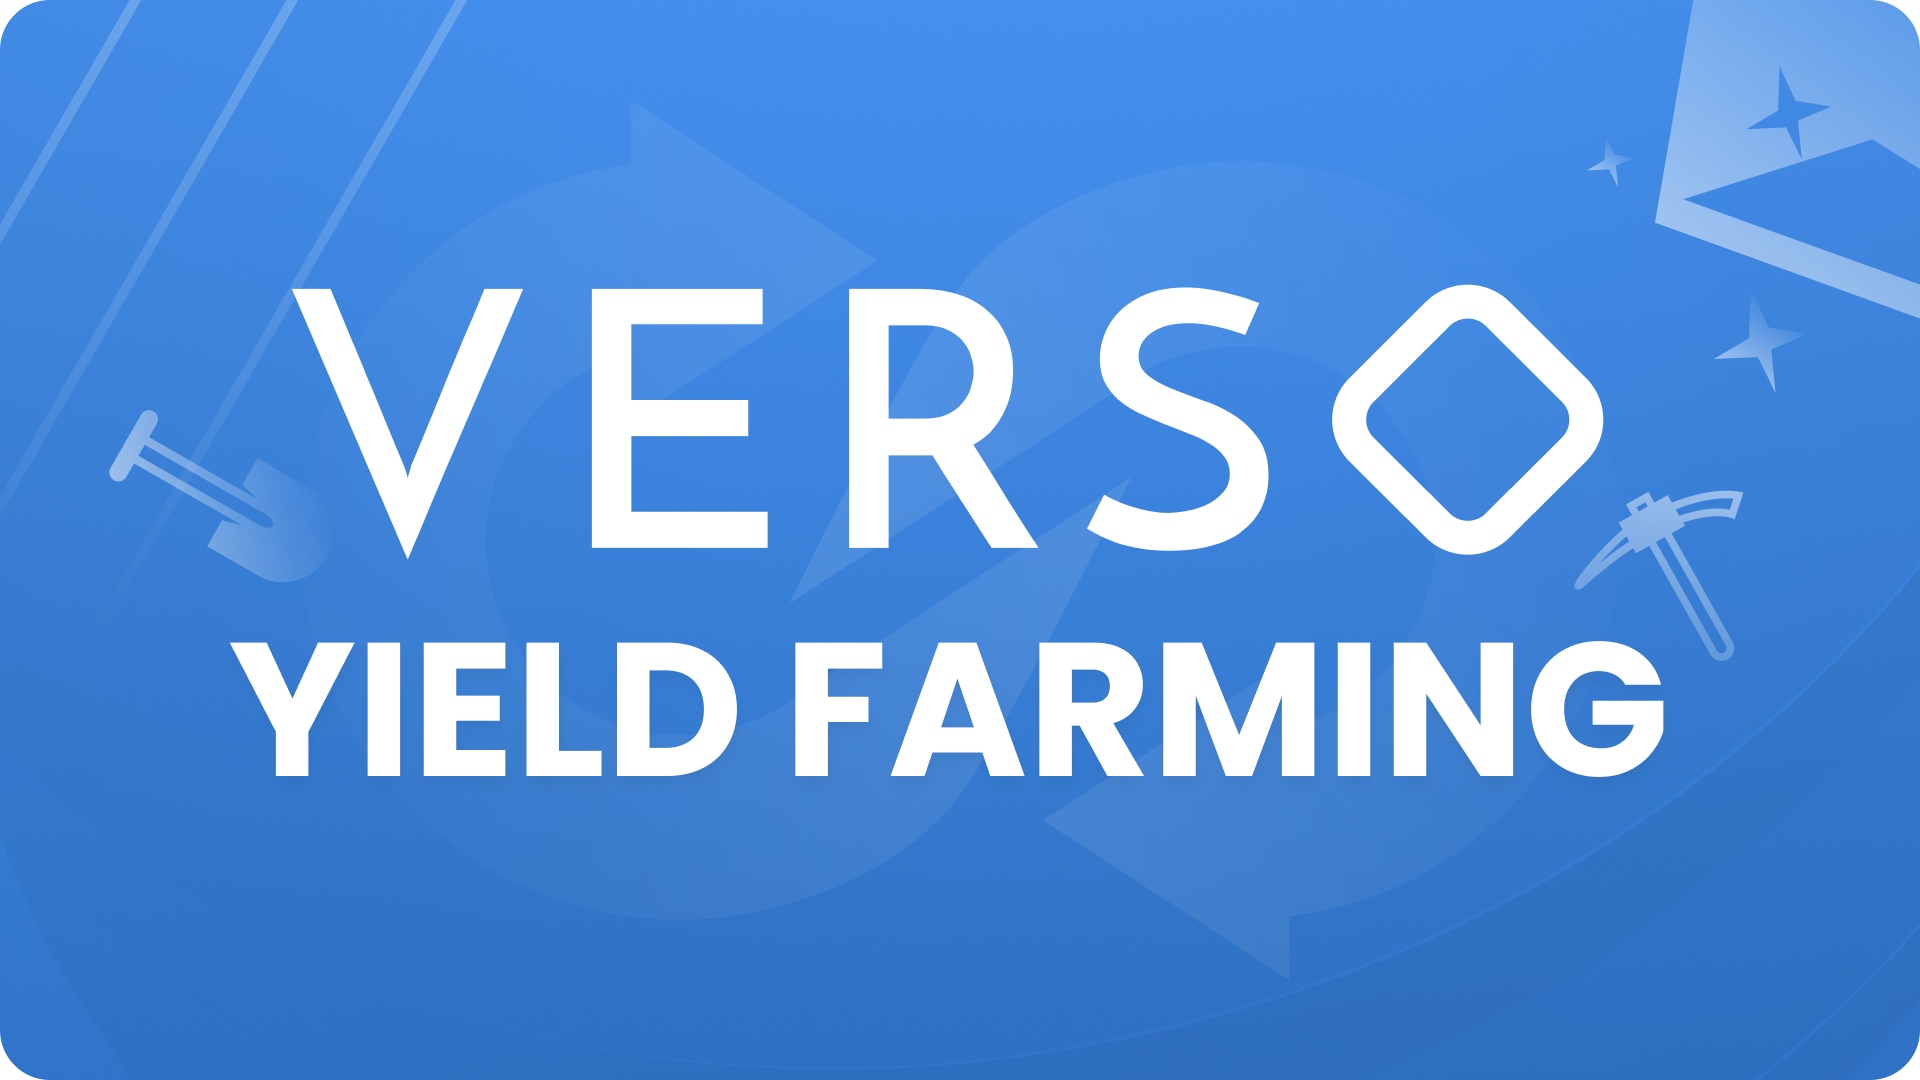 Get rewards! Stake $SWAP for $VSO Tokens in their Yield Farming program